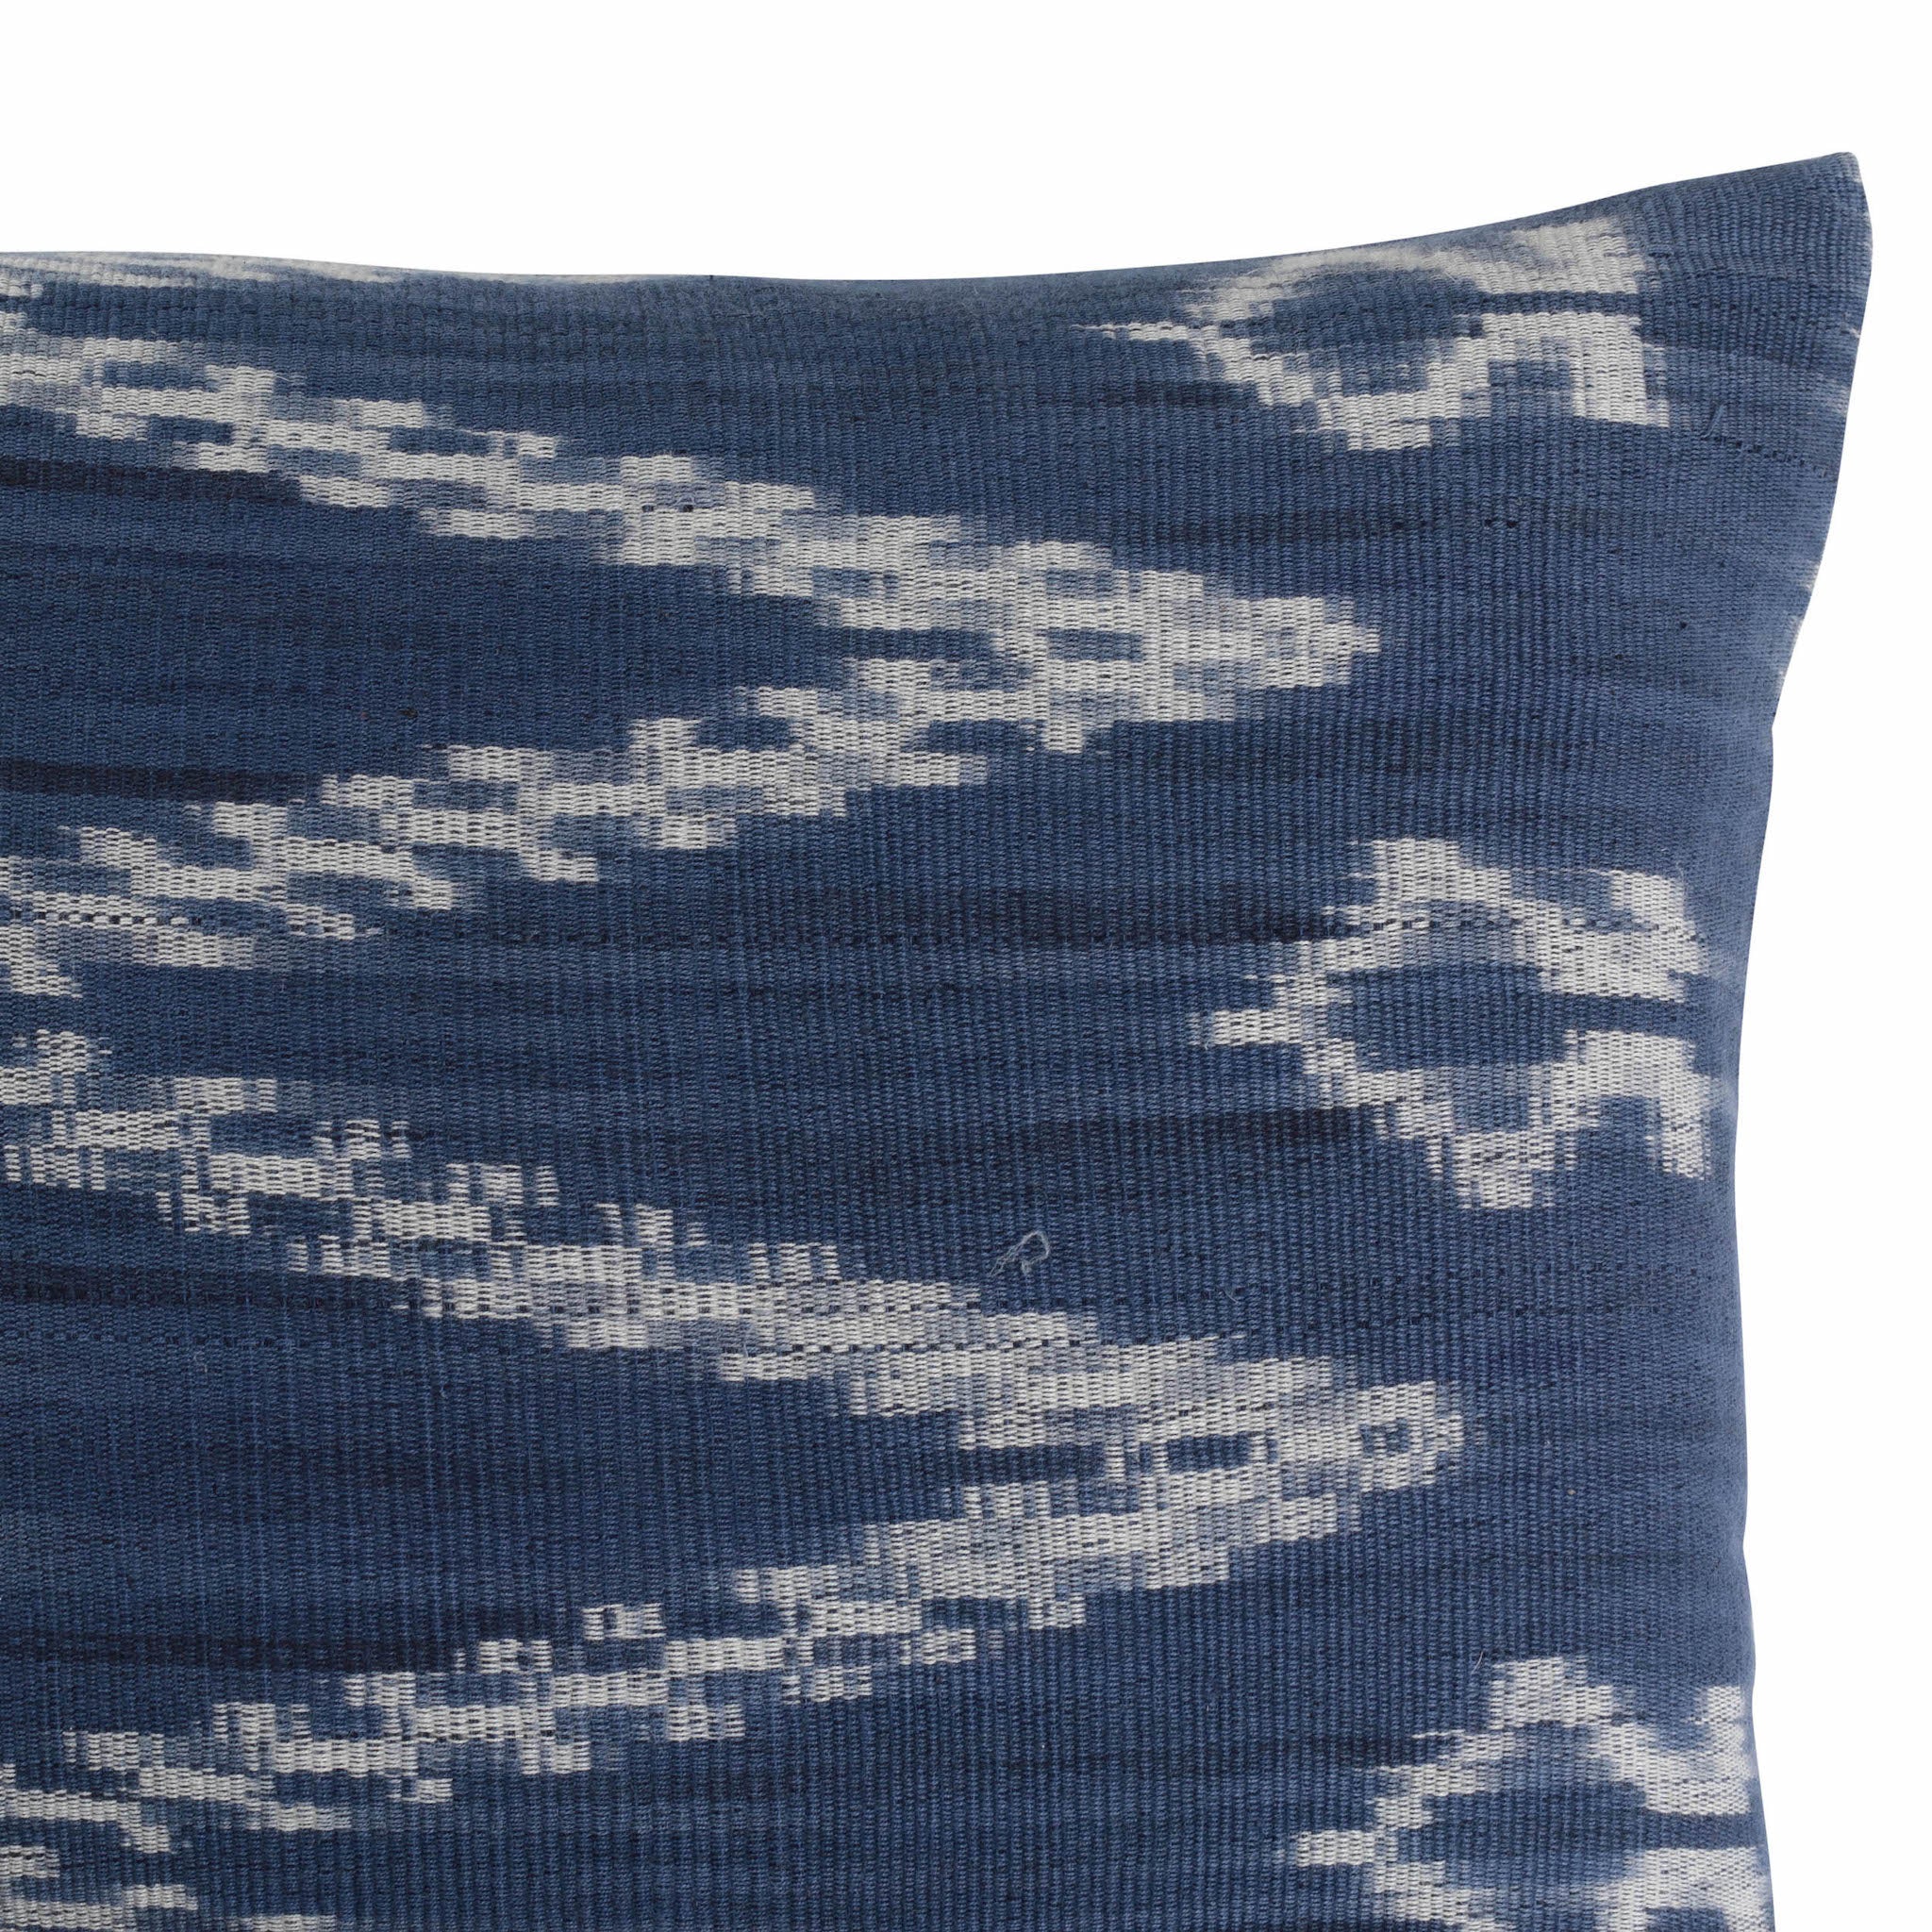 Navy Blue and White Hand Woven Ikat Rectangle Scatter Cushion from Bali, Indonesia - DETAIL